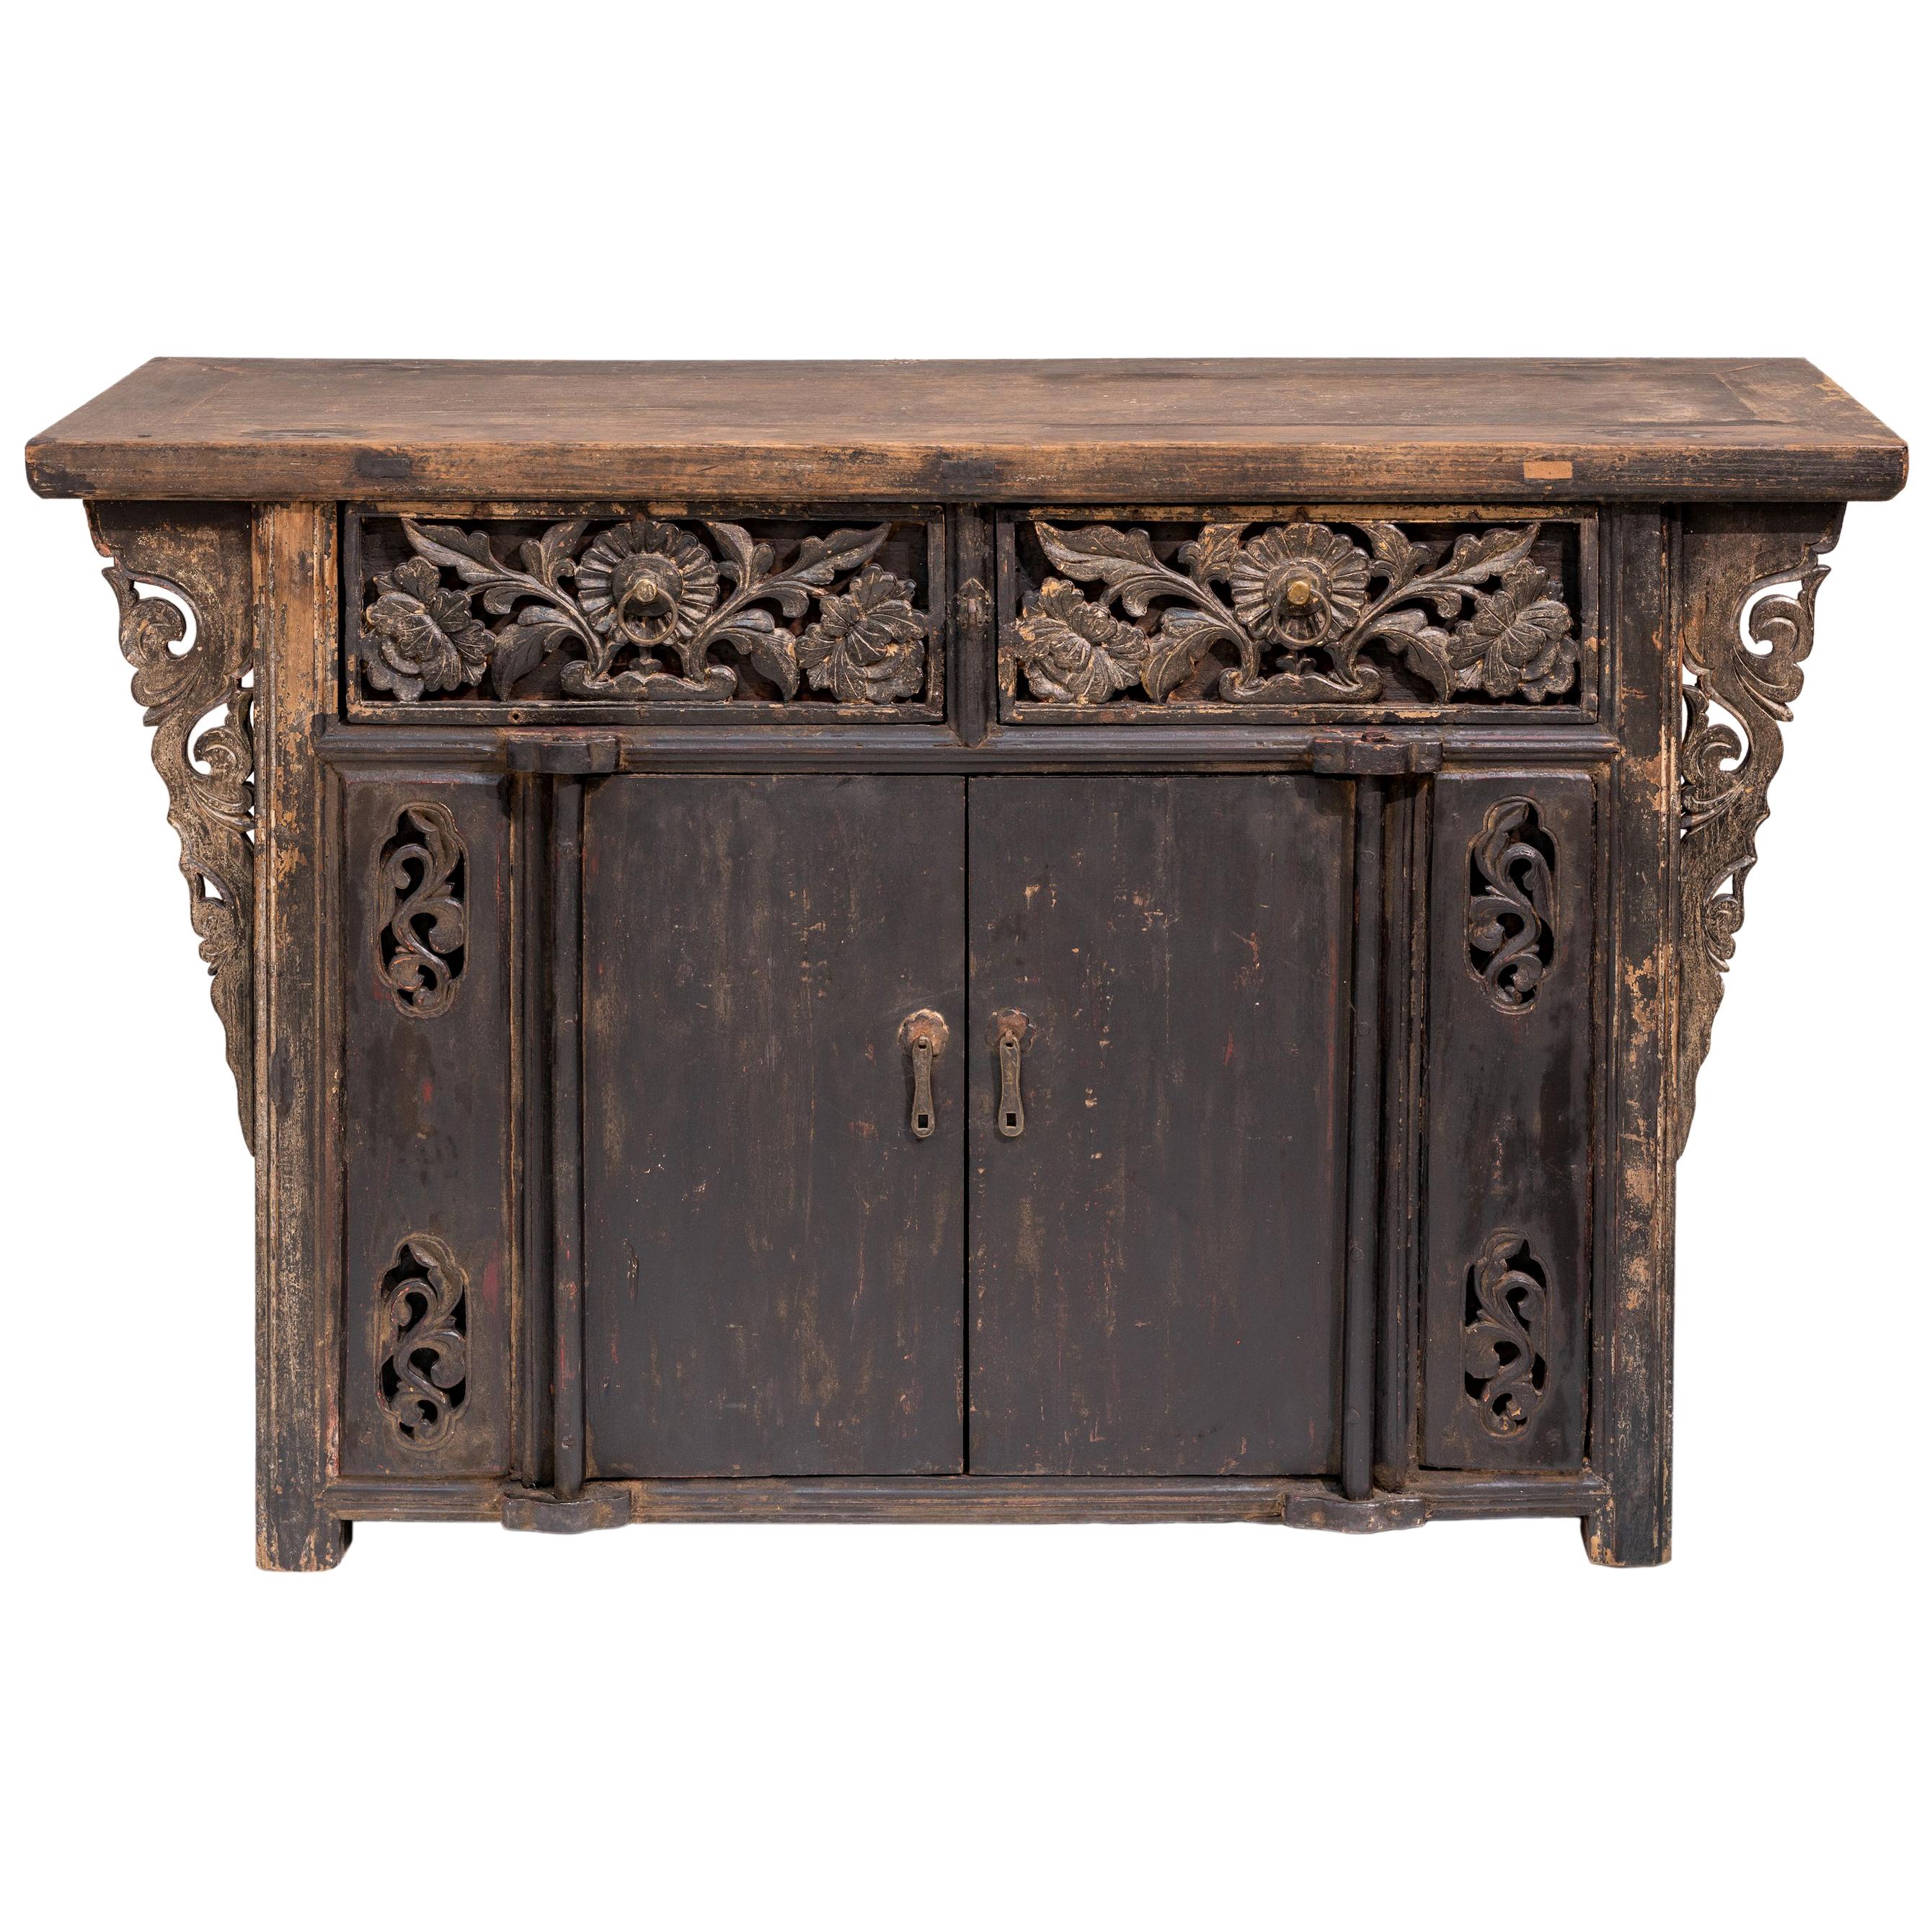 Mid-19th Century Carved Cabinet from Shanxi, China